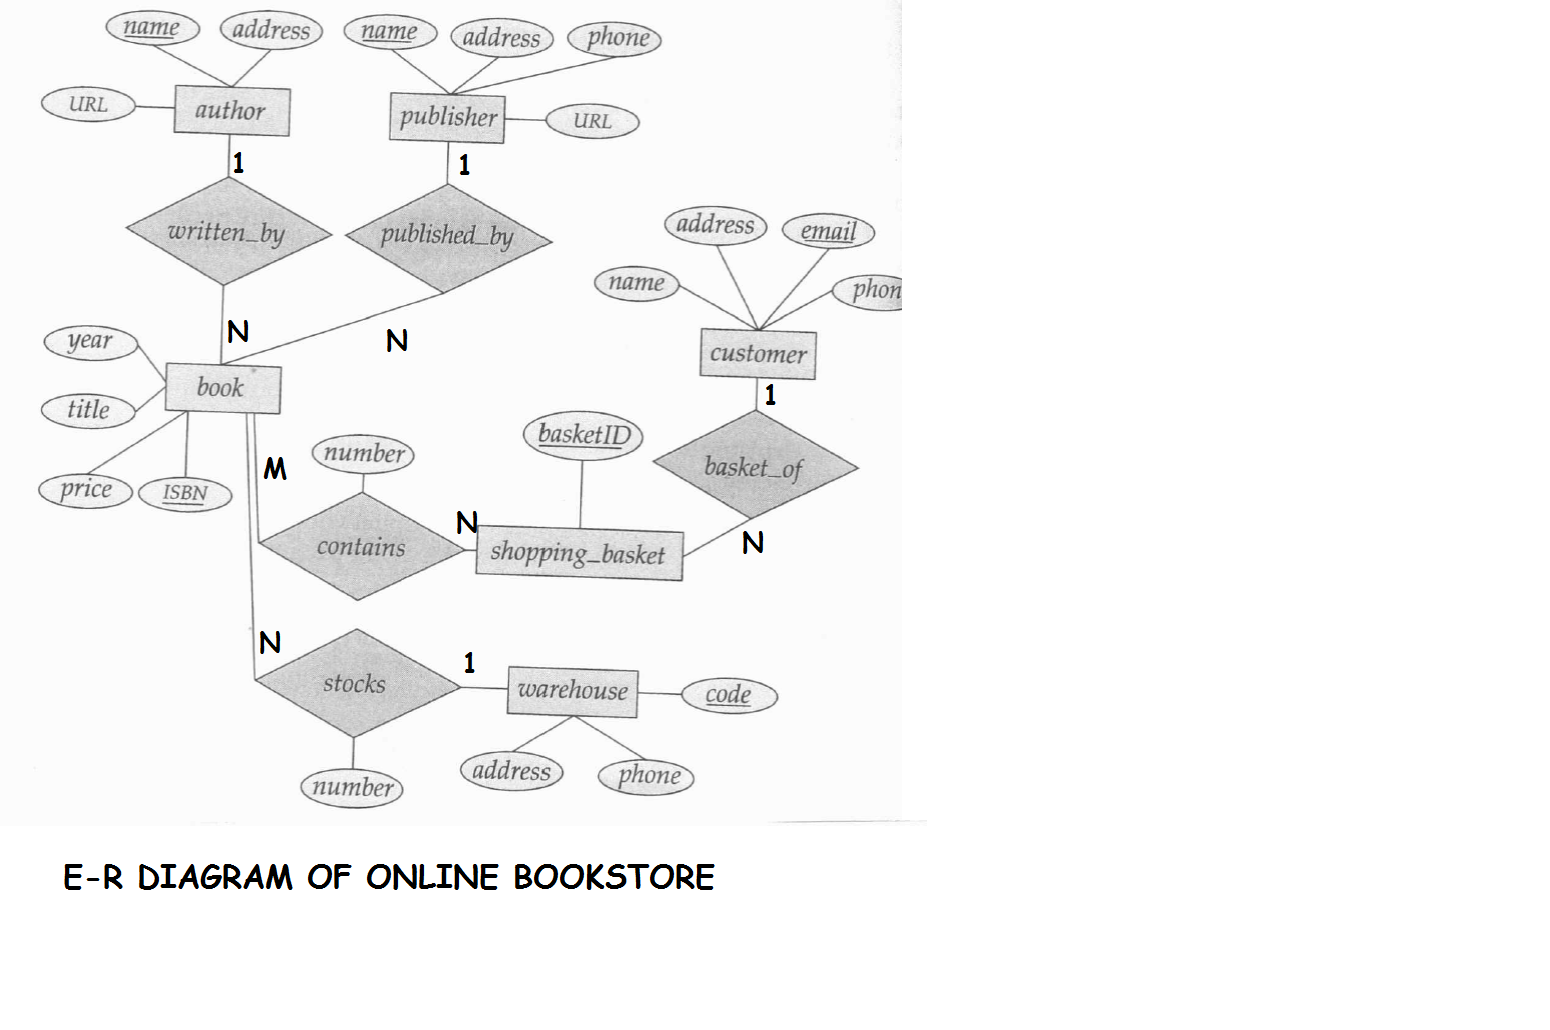 E R Diagram For Online Bookstore Roll N0 3 s5 Cs2 Lbs 